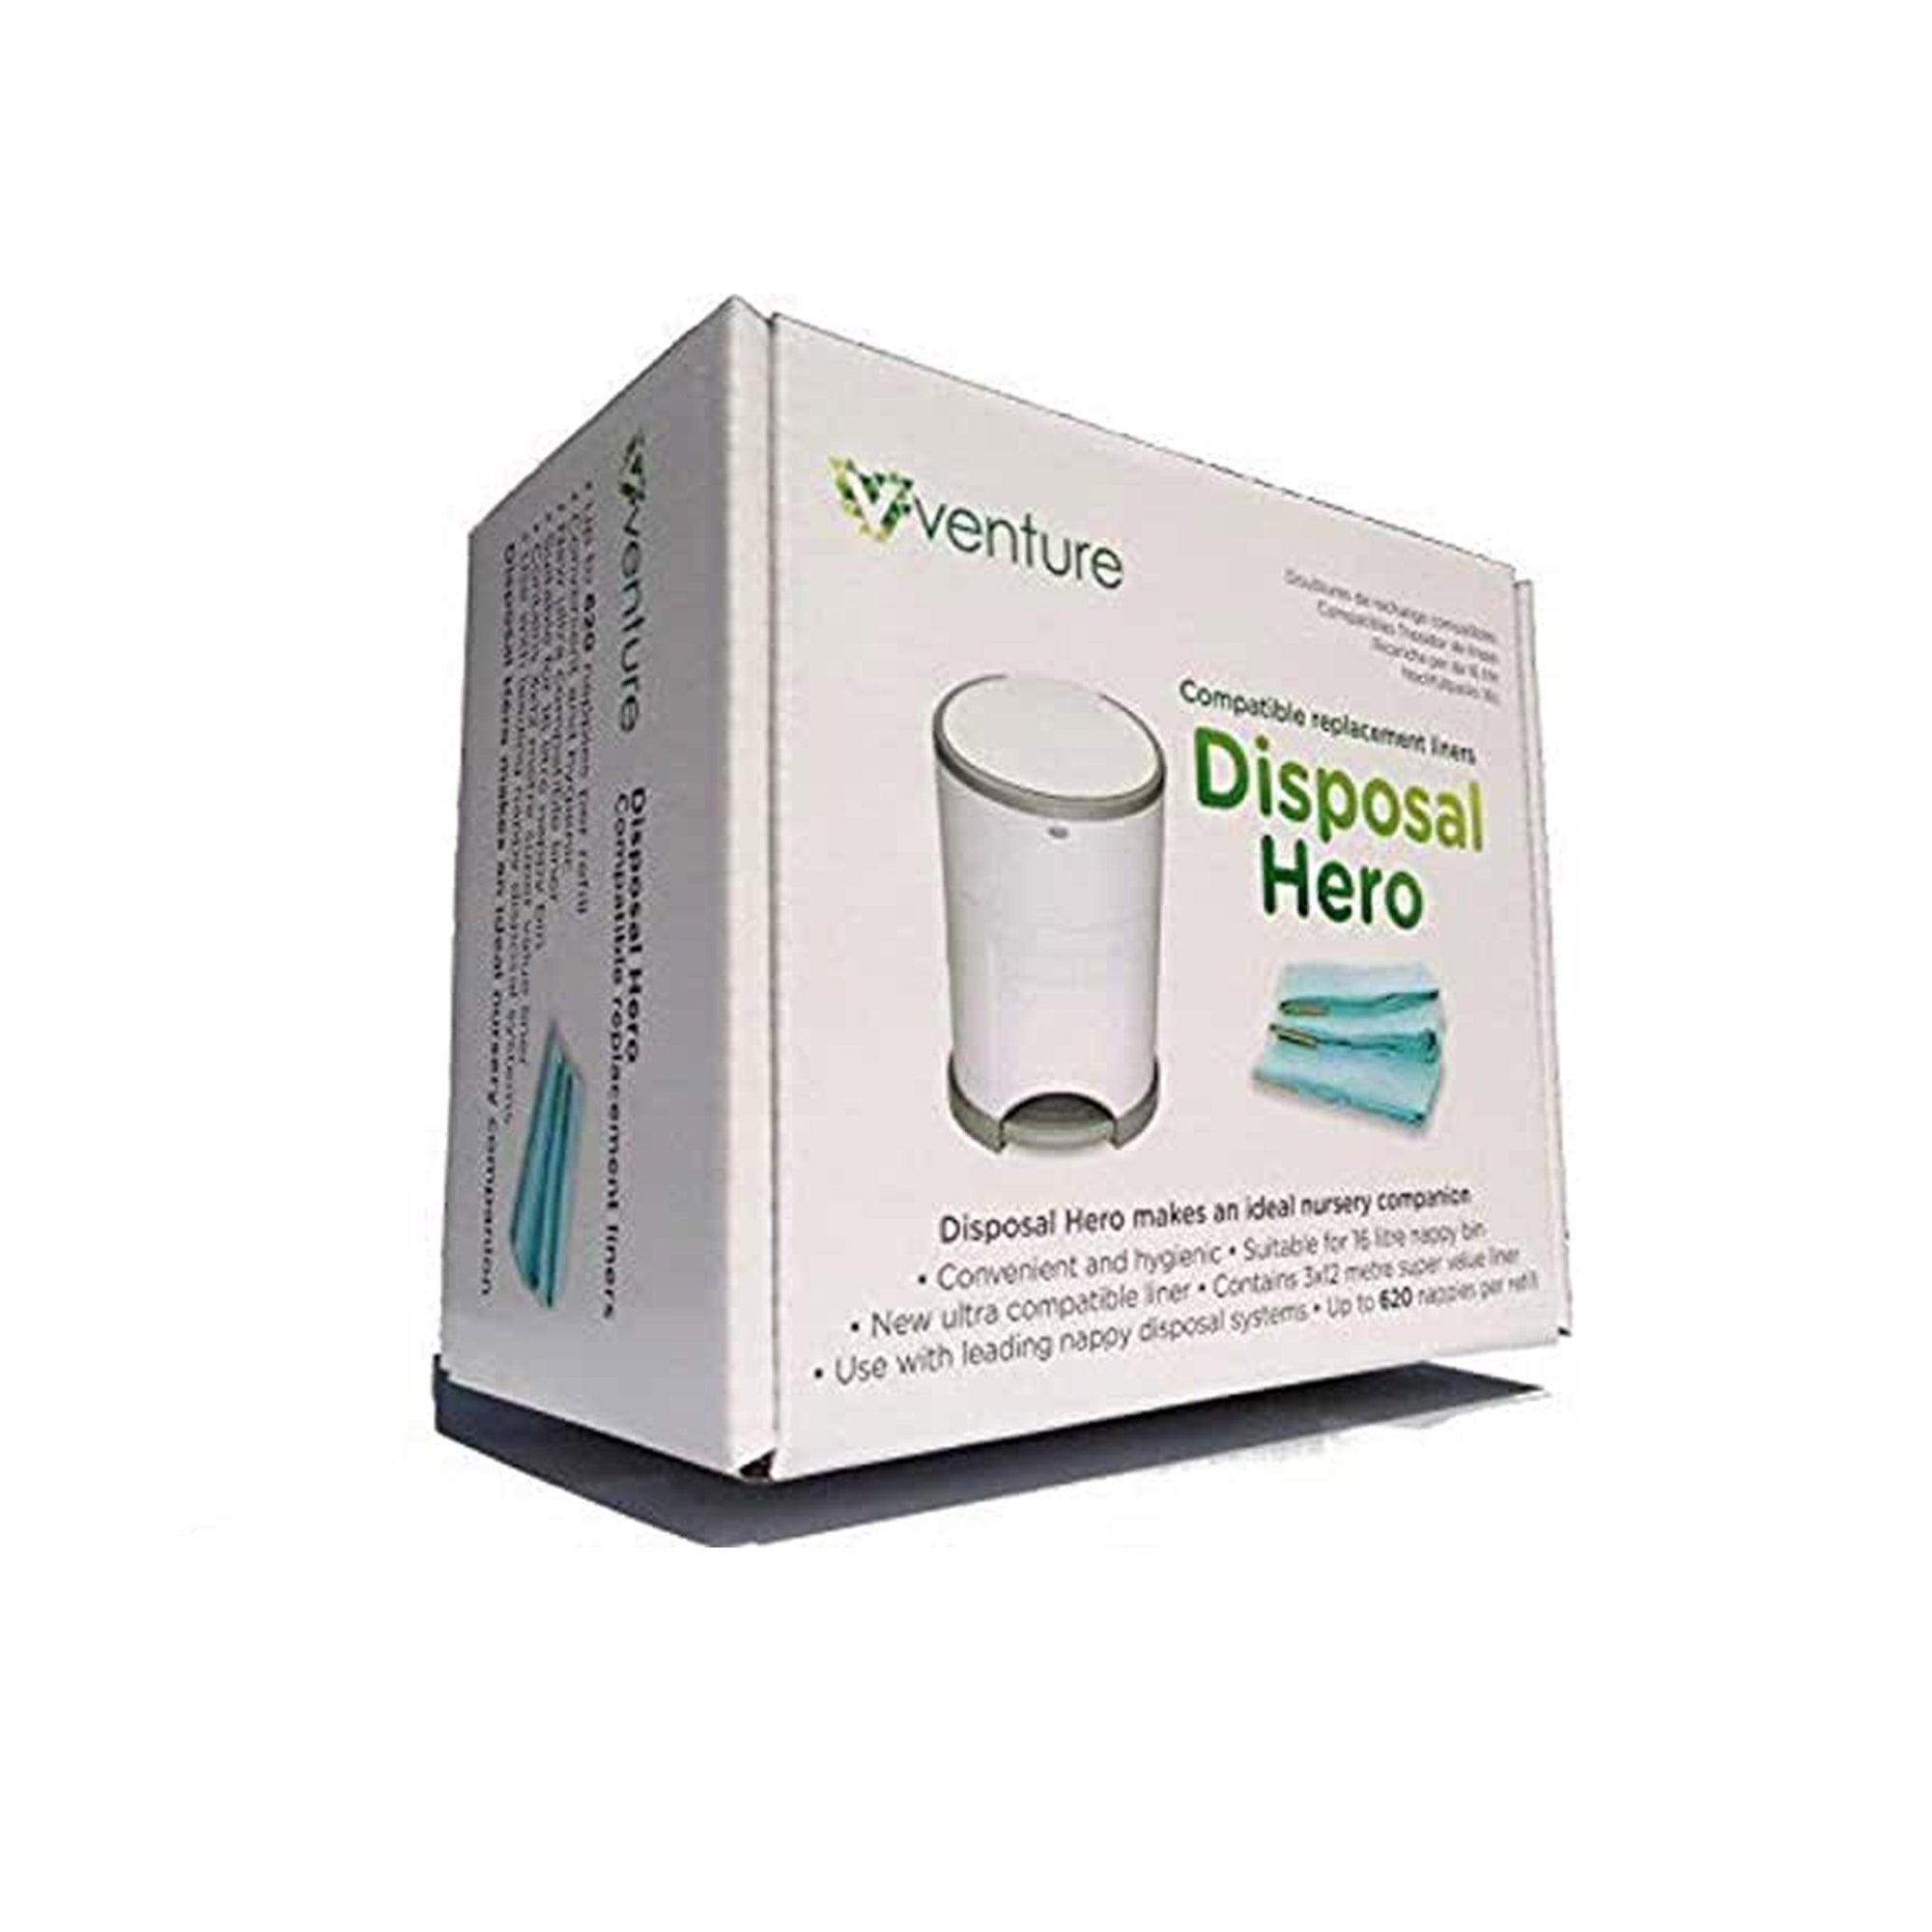 Disposable Hero - Nappy Bin Refill Liners